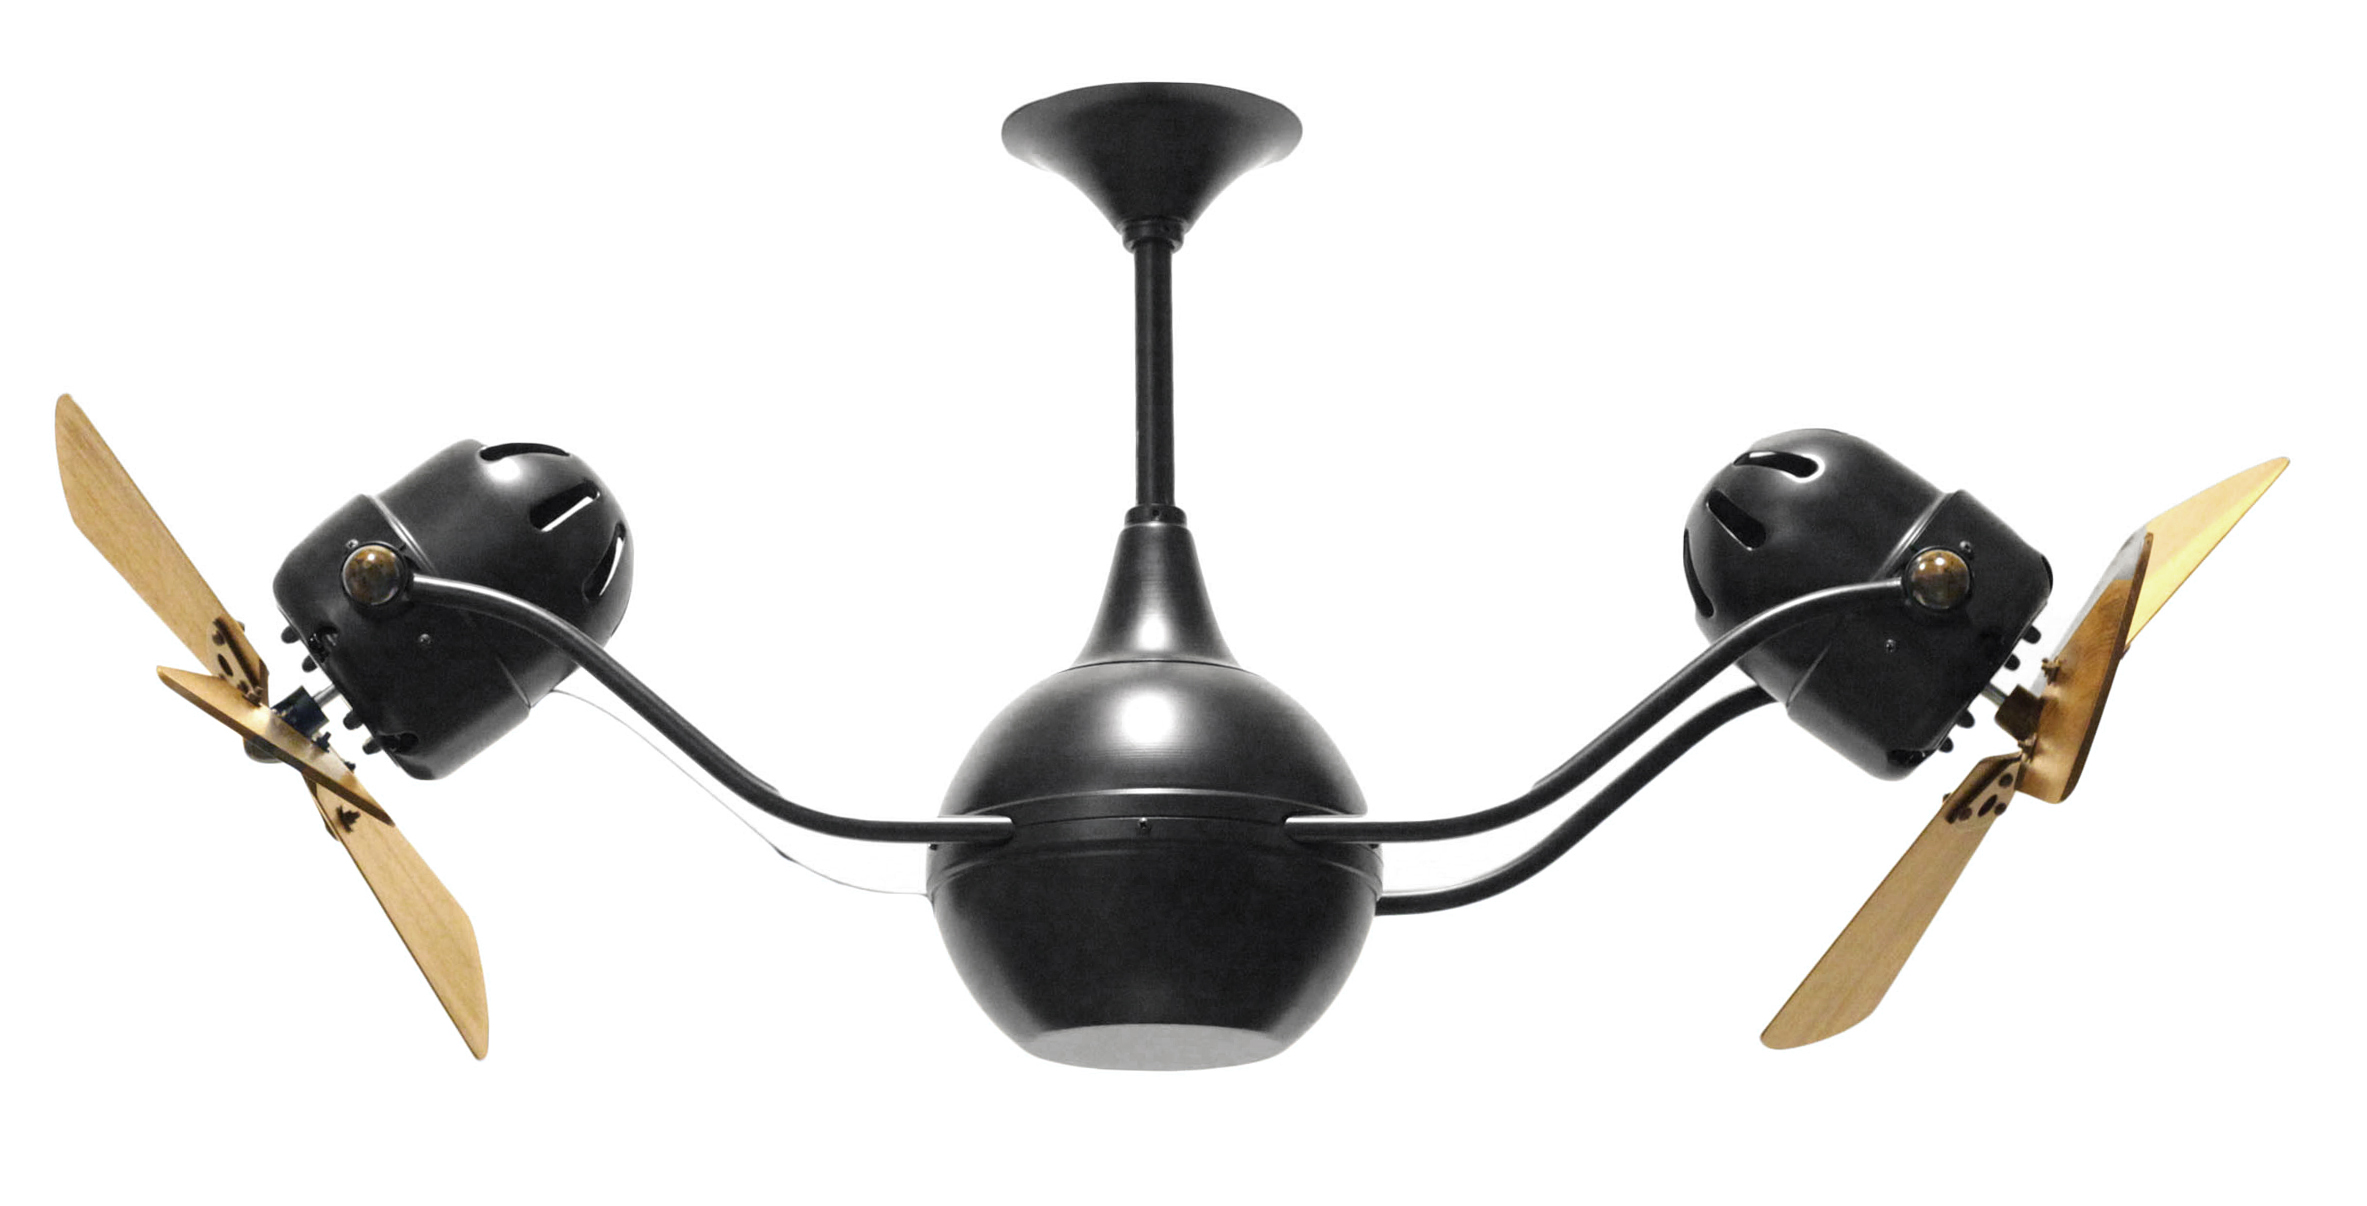 Vent-Bettina rotational dual head ceiling fan in Black finish with